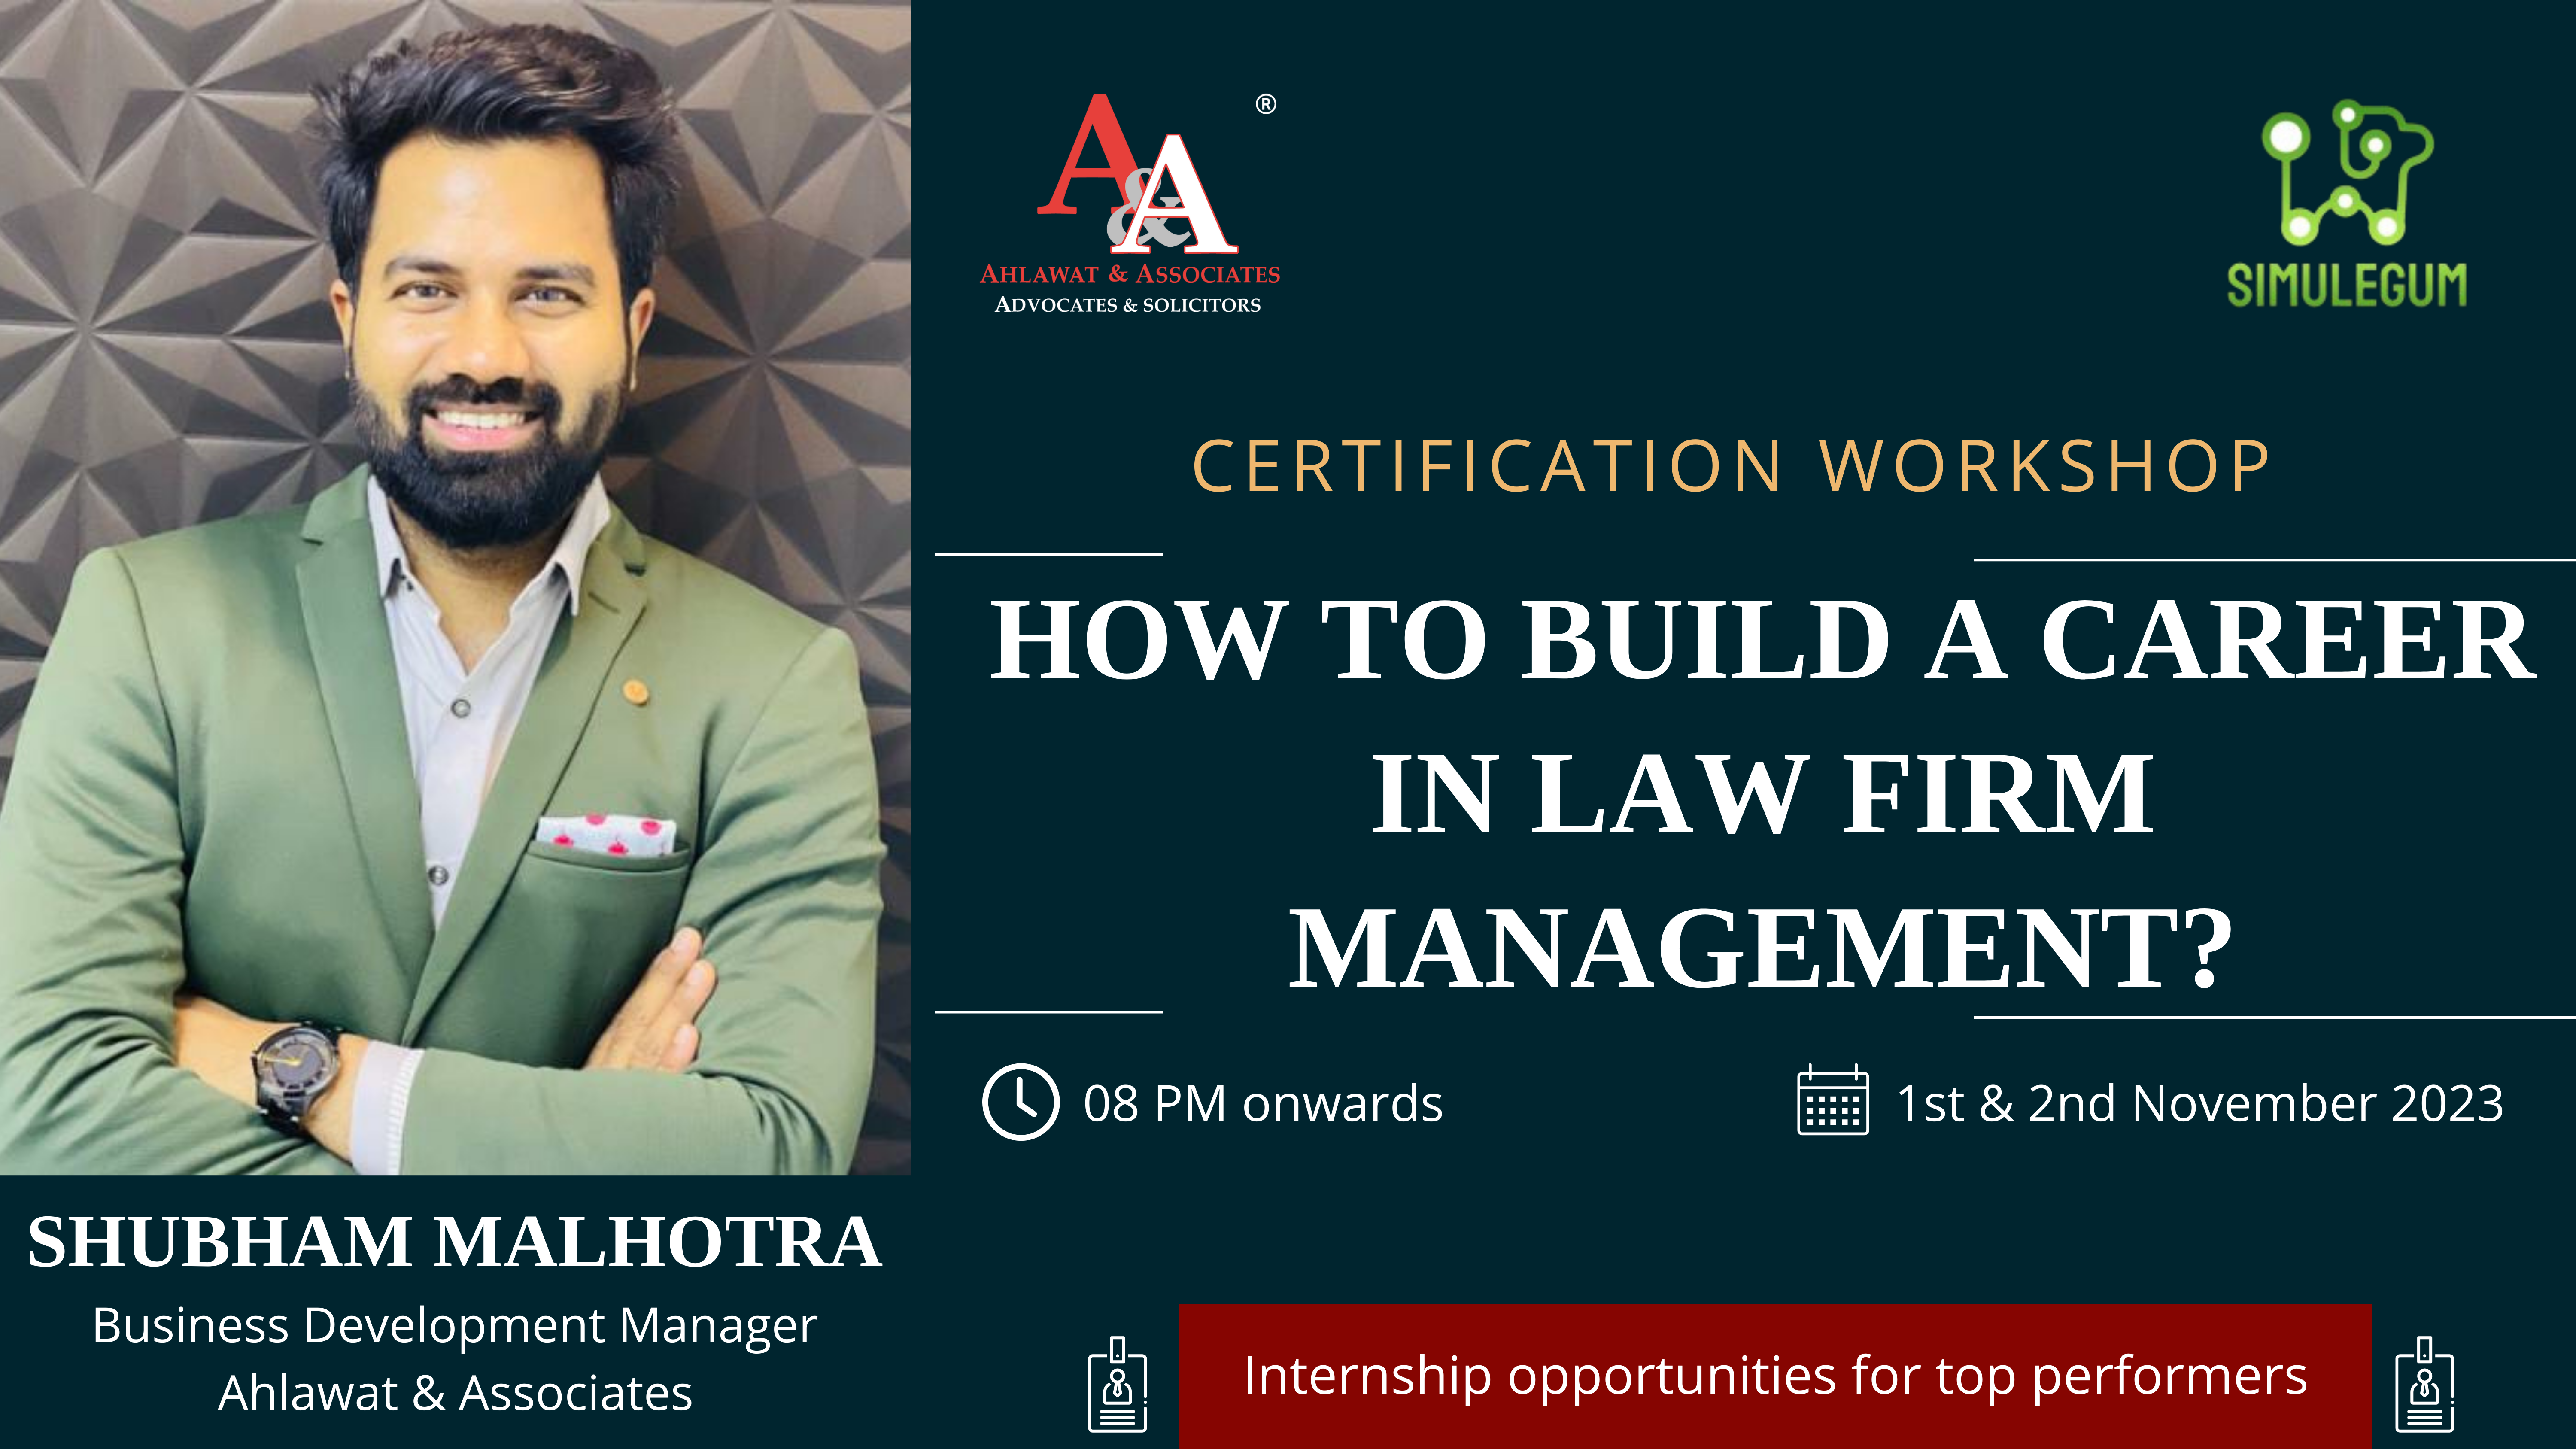 2 day workshop on “How to Build a Career in Law Firm Management” – Mr. Shubham Malhotra, Business Development Manager, Ahlawat & Associates